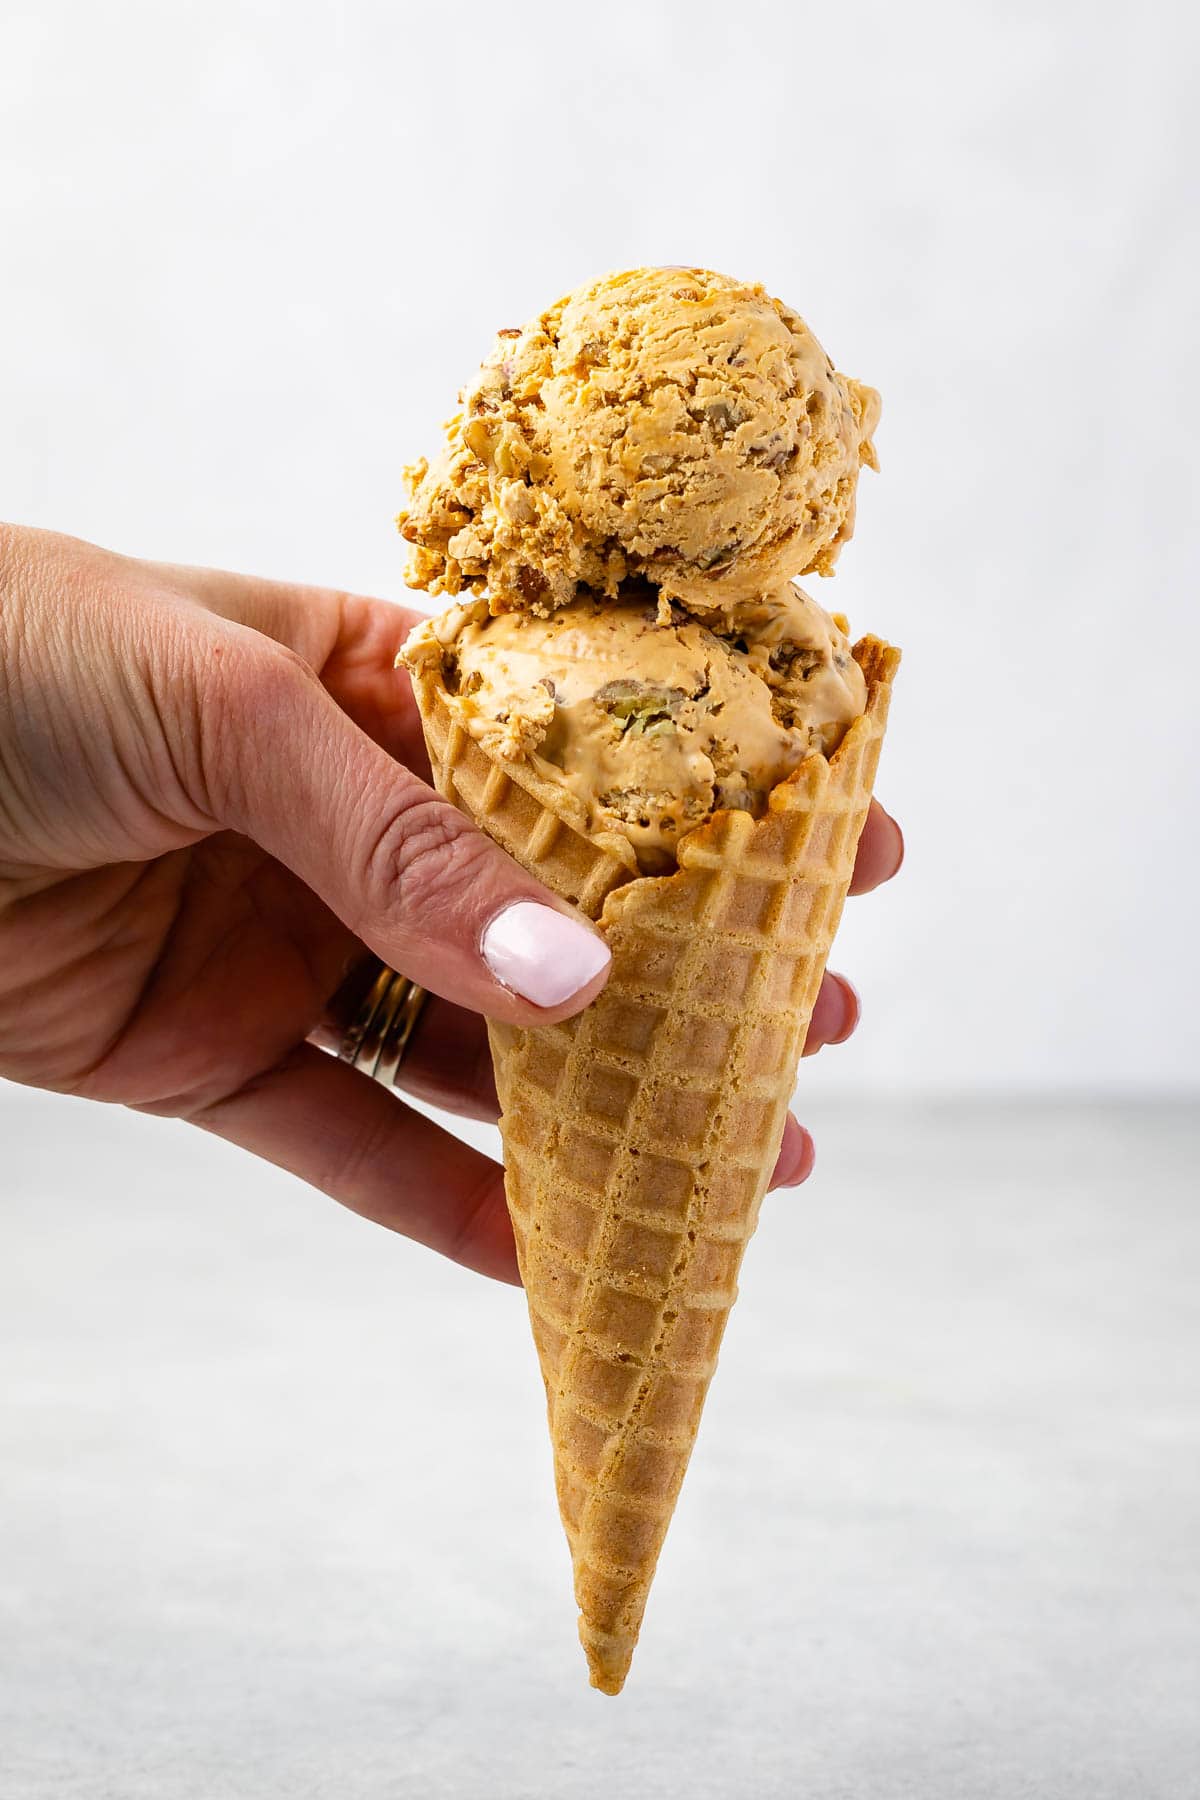 Hand holding a waffle cone filled with scoops of dulce de leche ice cream